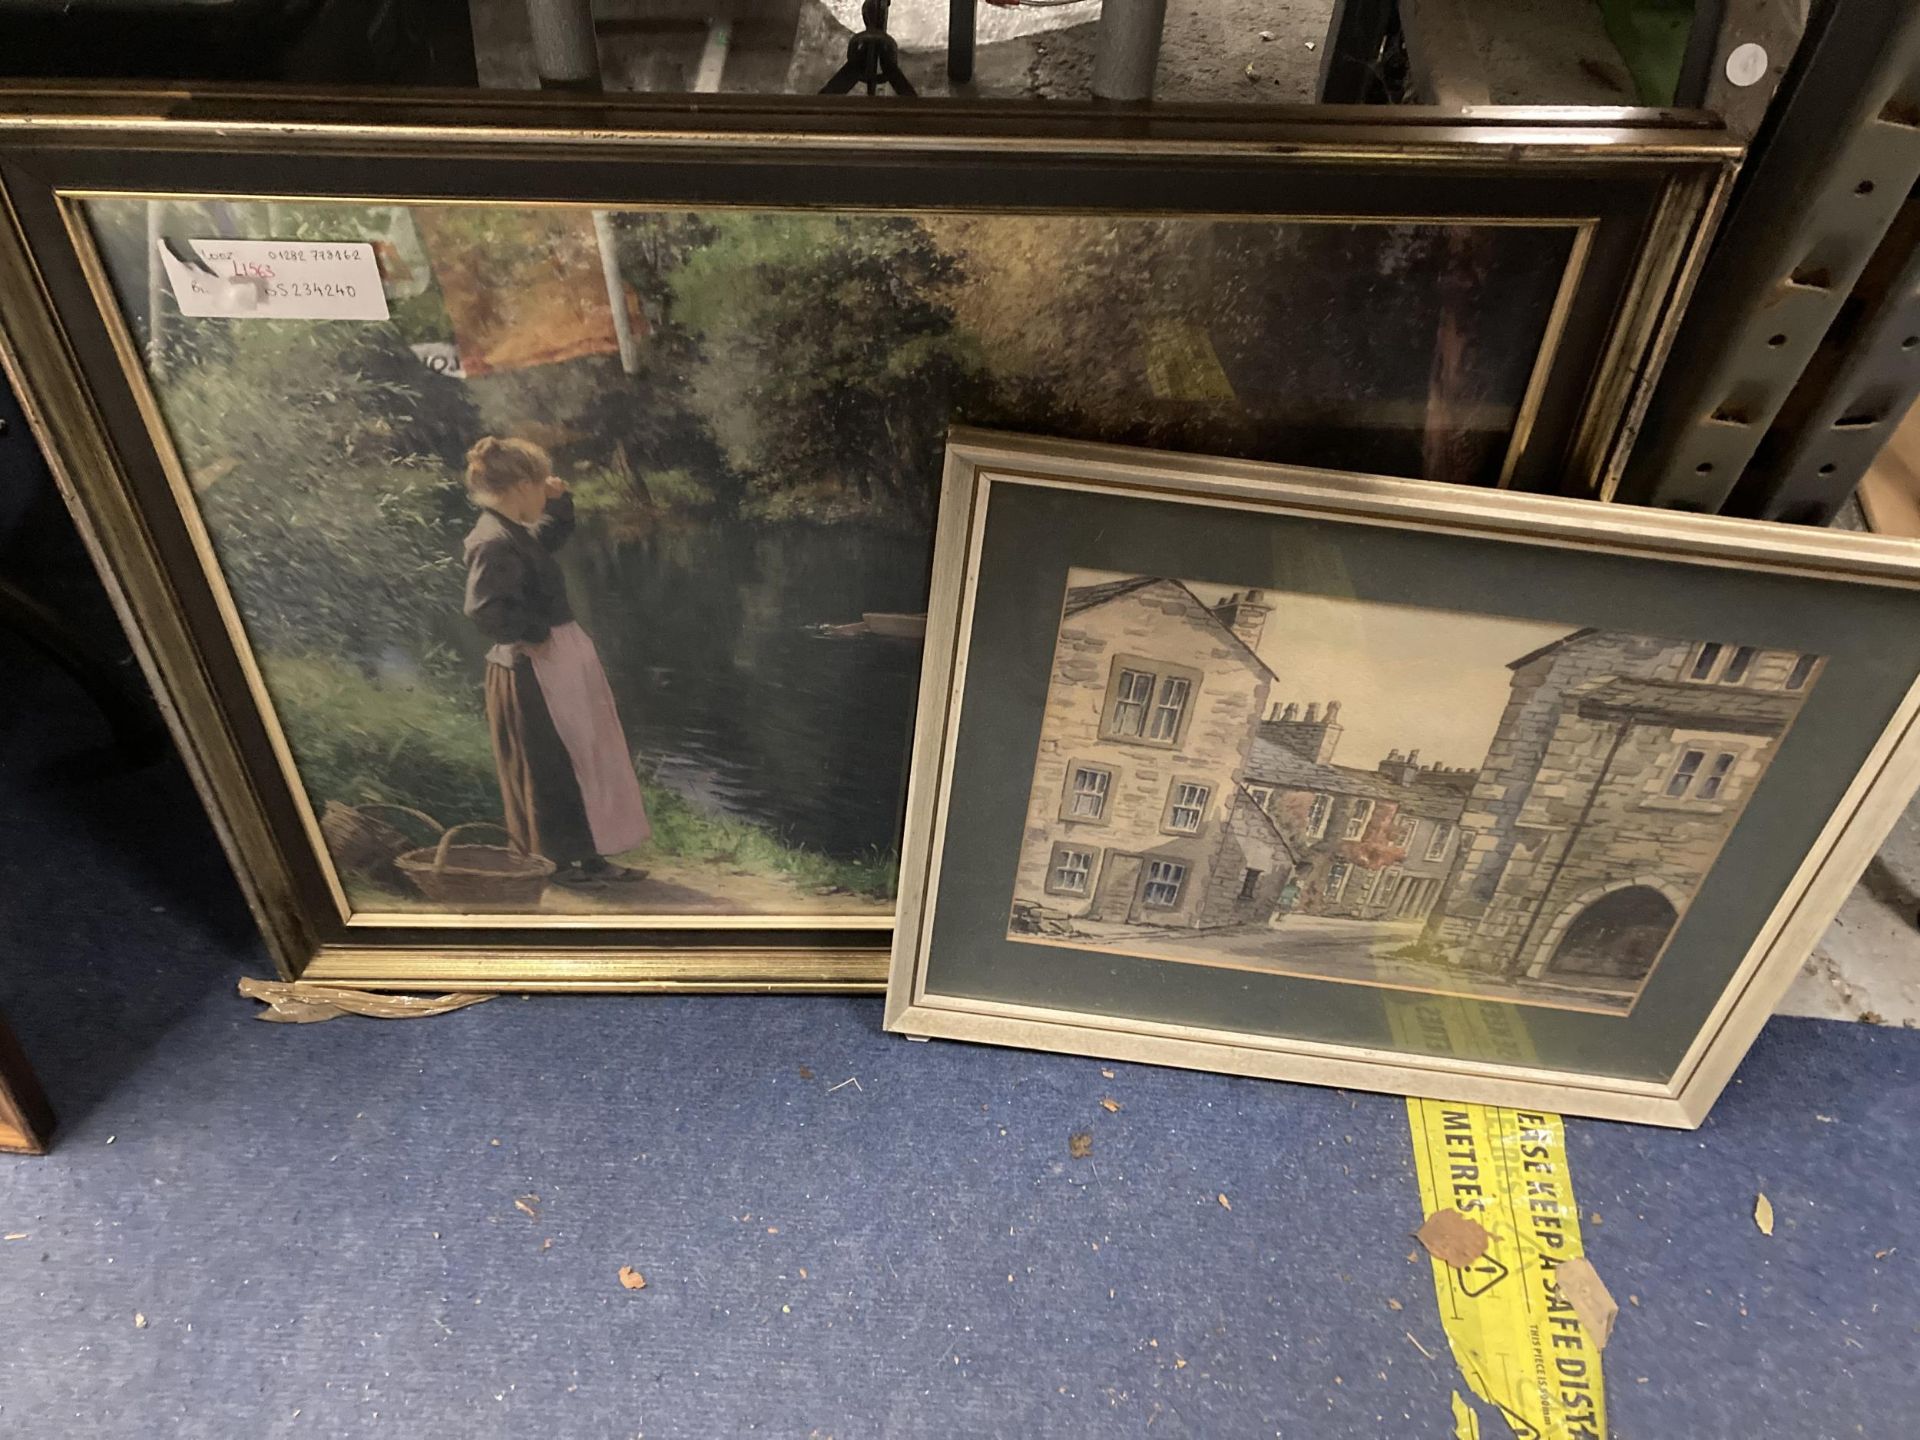 TWO FRAMED PRINTS INCLUDING A TOWN SCENE AND BOAT SCENE